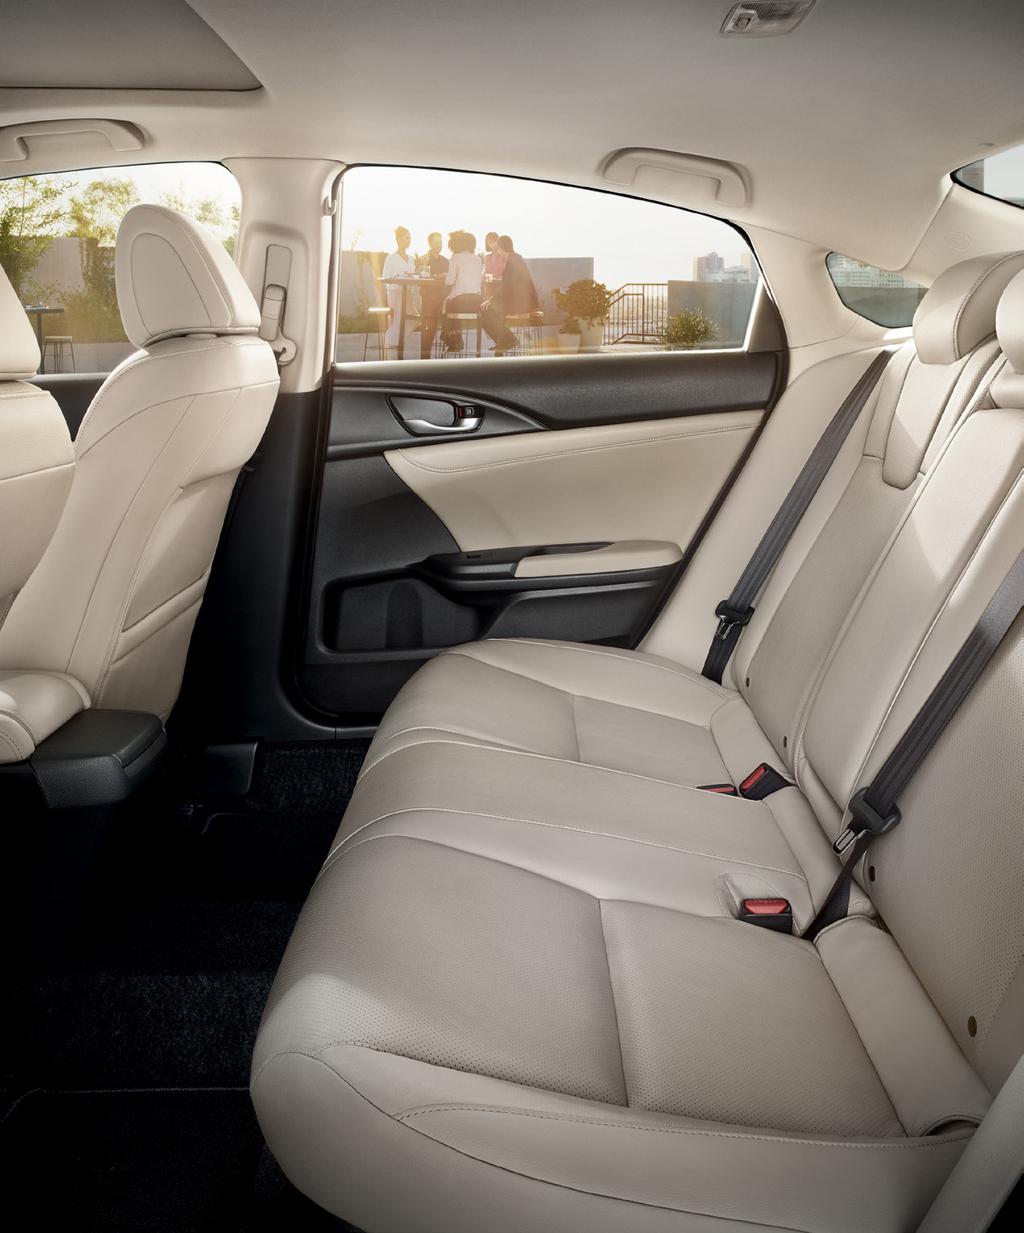 Looking sharp never felt so smart. The Insight features high-tech amenities and plenty of interior space.